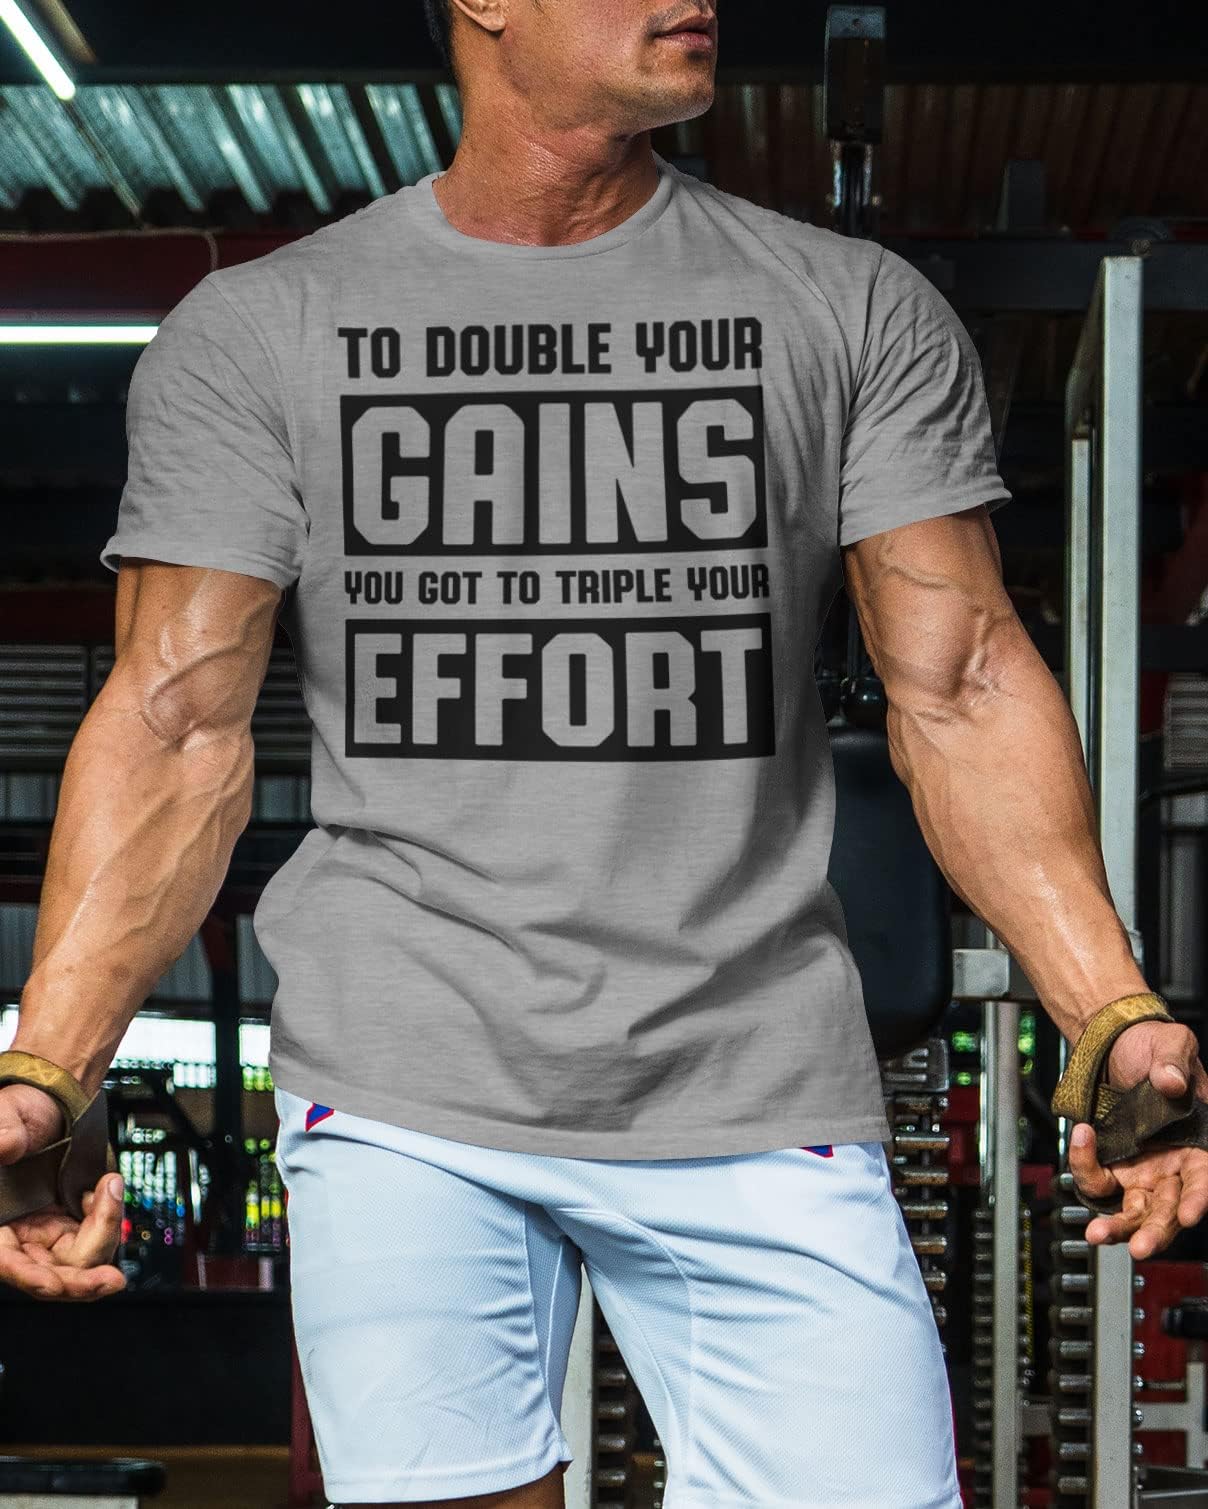 053. DOUBLE YOUR GAINS Workout T-Shirt